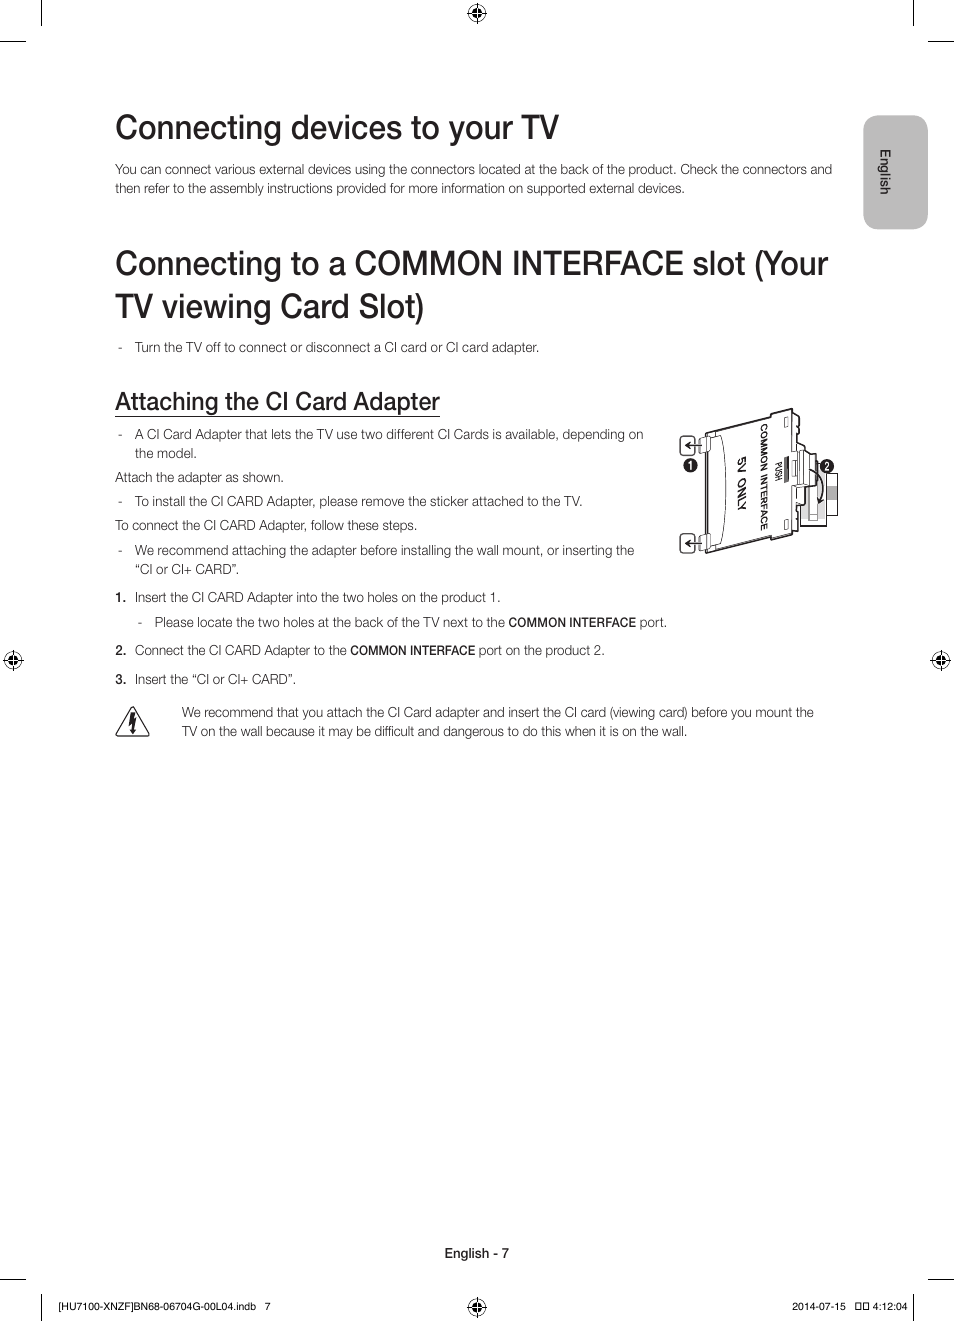 Connecting devices to your tv, Attaching the ci card | Samsung UE55HU7100S User Manual | Page 7 / 82